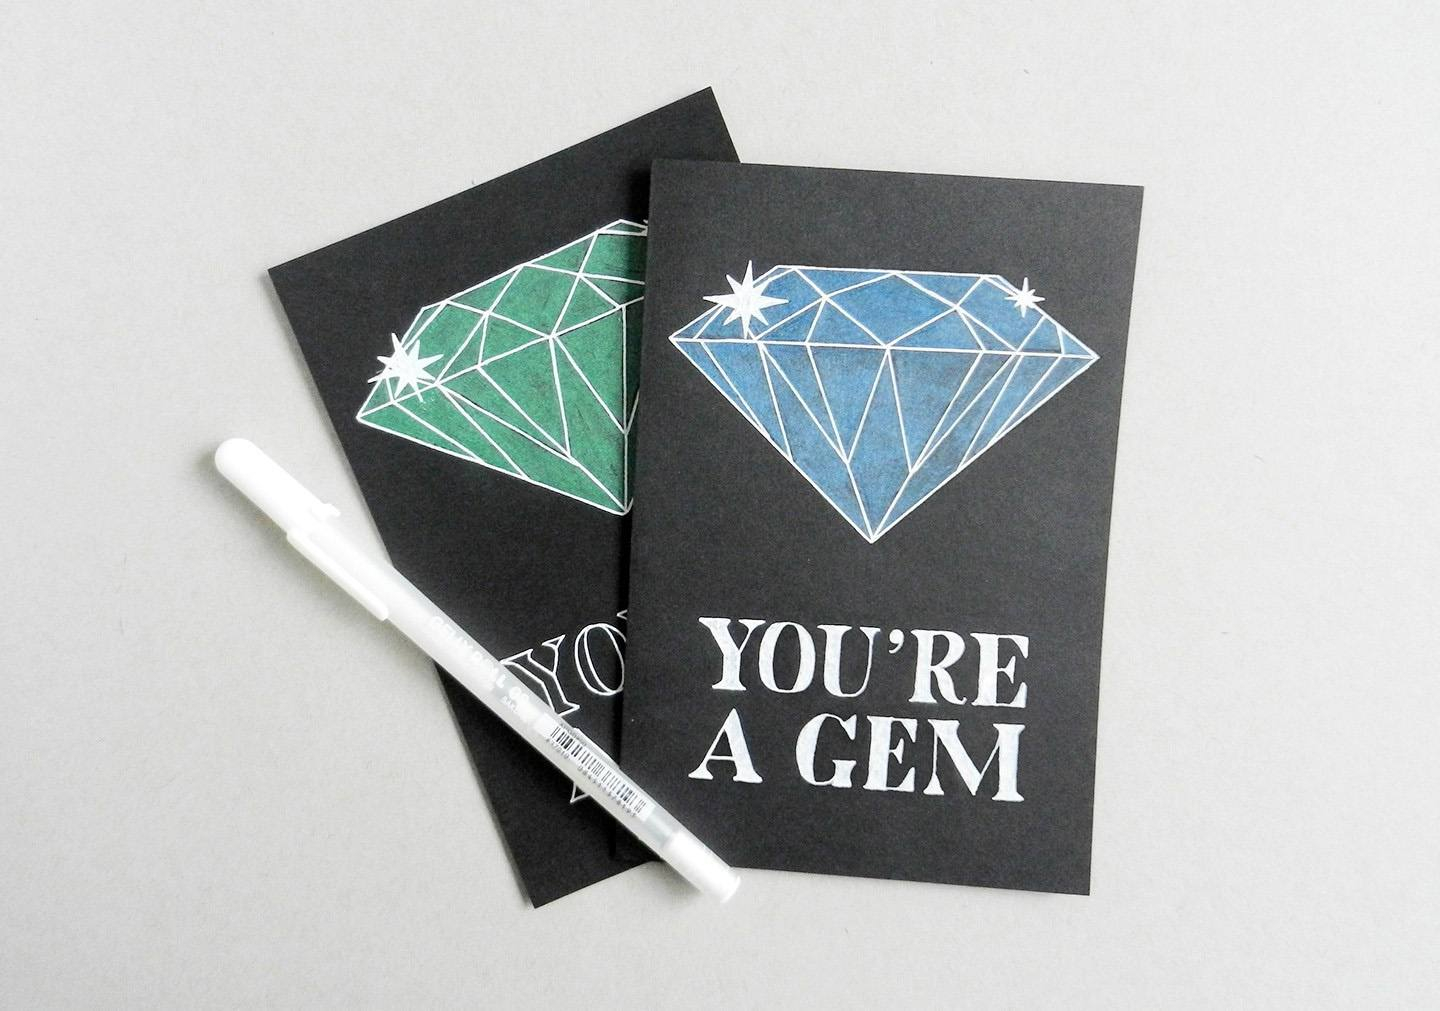 Girlfriend Birthday Card Ideas Get Inspiration From 25 Of The Best Diy Birthday Cards